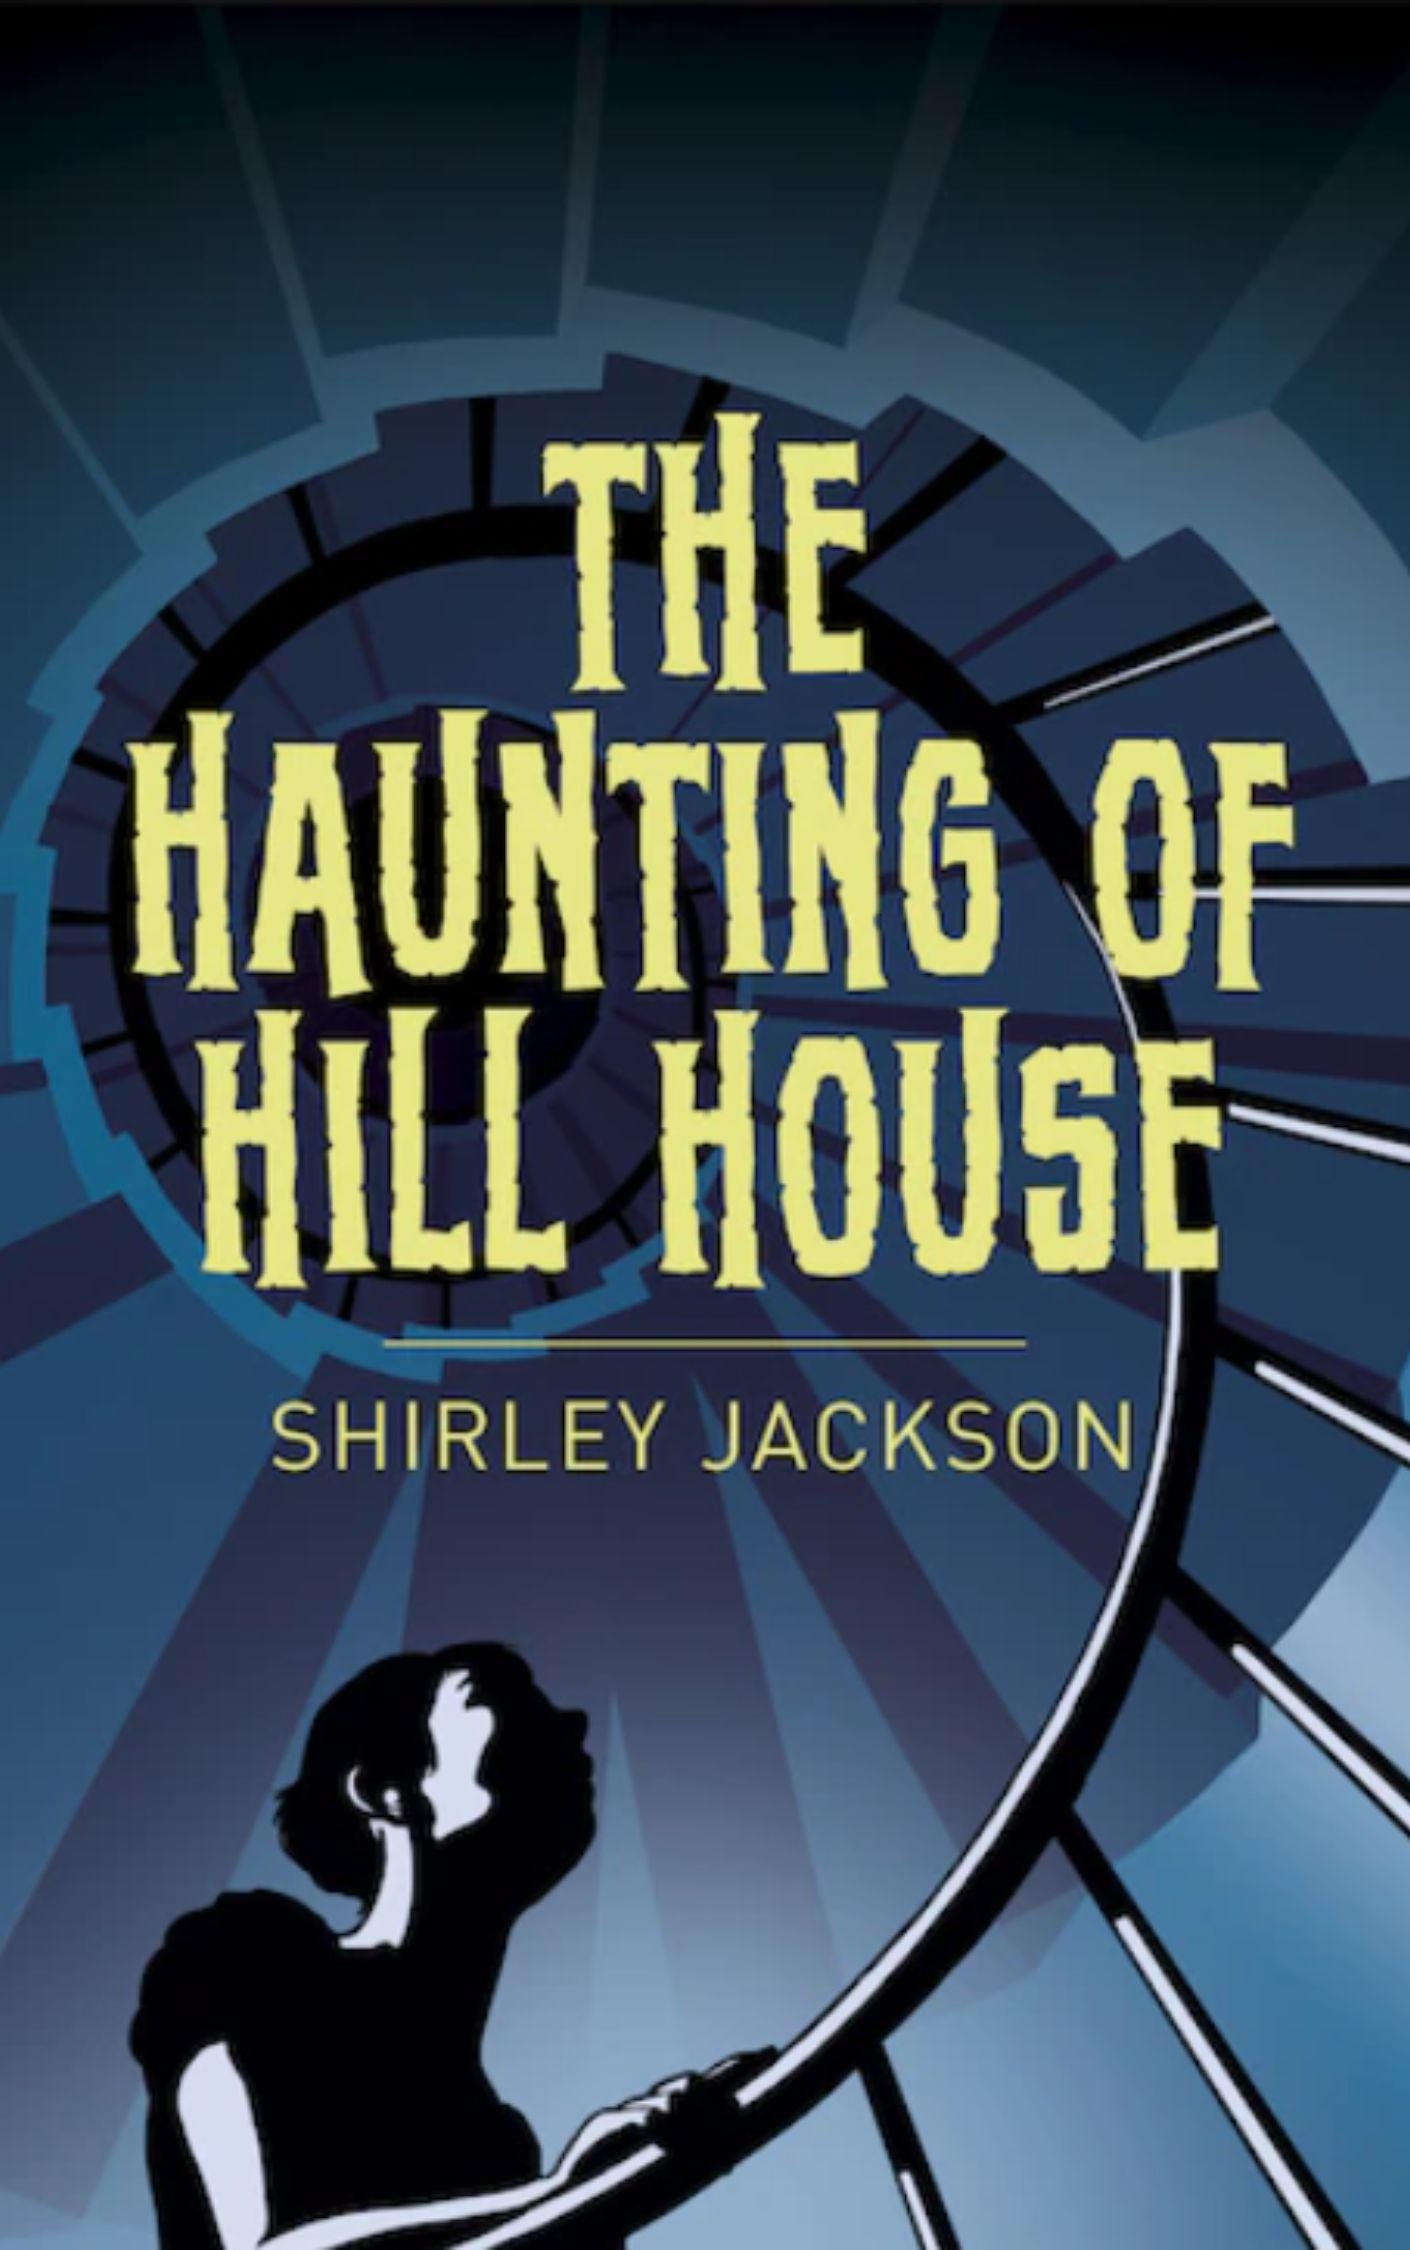 "The Haunting of Hill House" by Shirley Jackson: Books for women